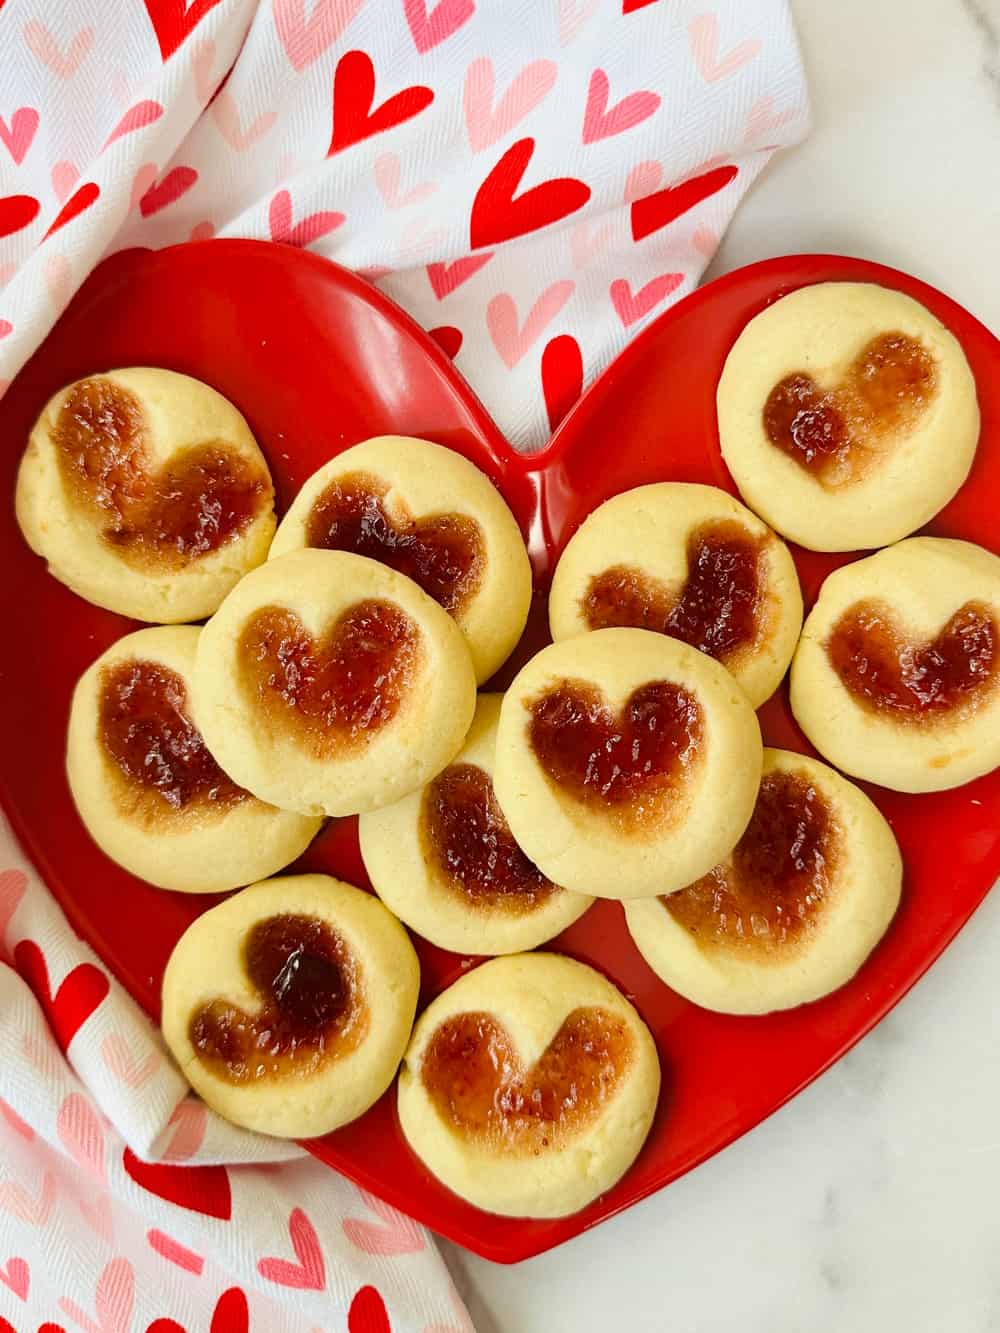 Make These Sweet Jam Heart Thumbprint Cookies With Kids This Valentine’s Day